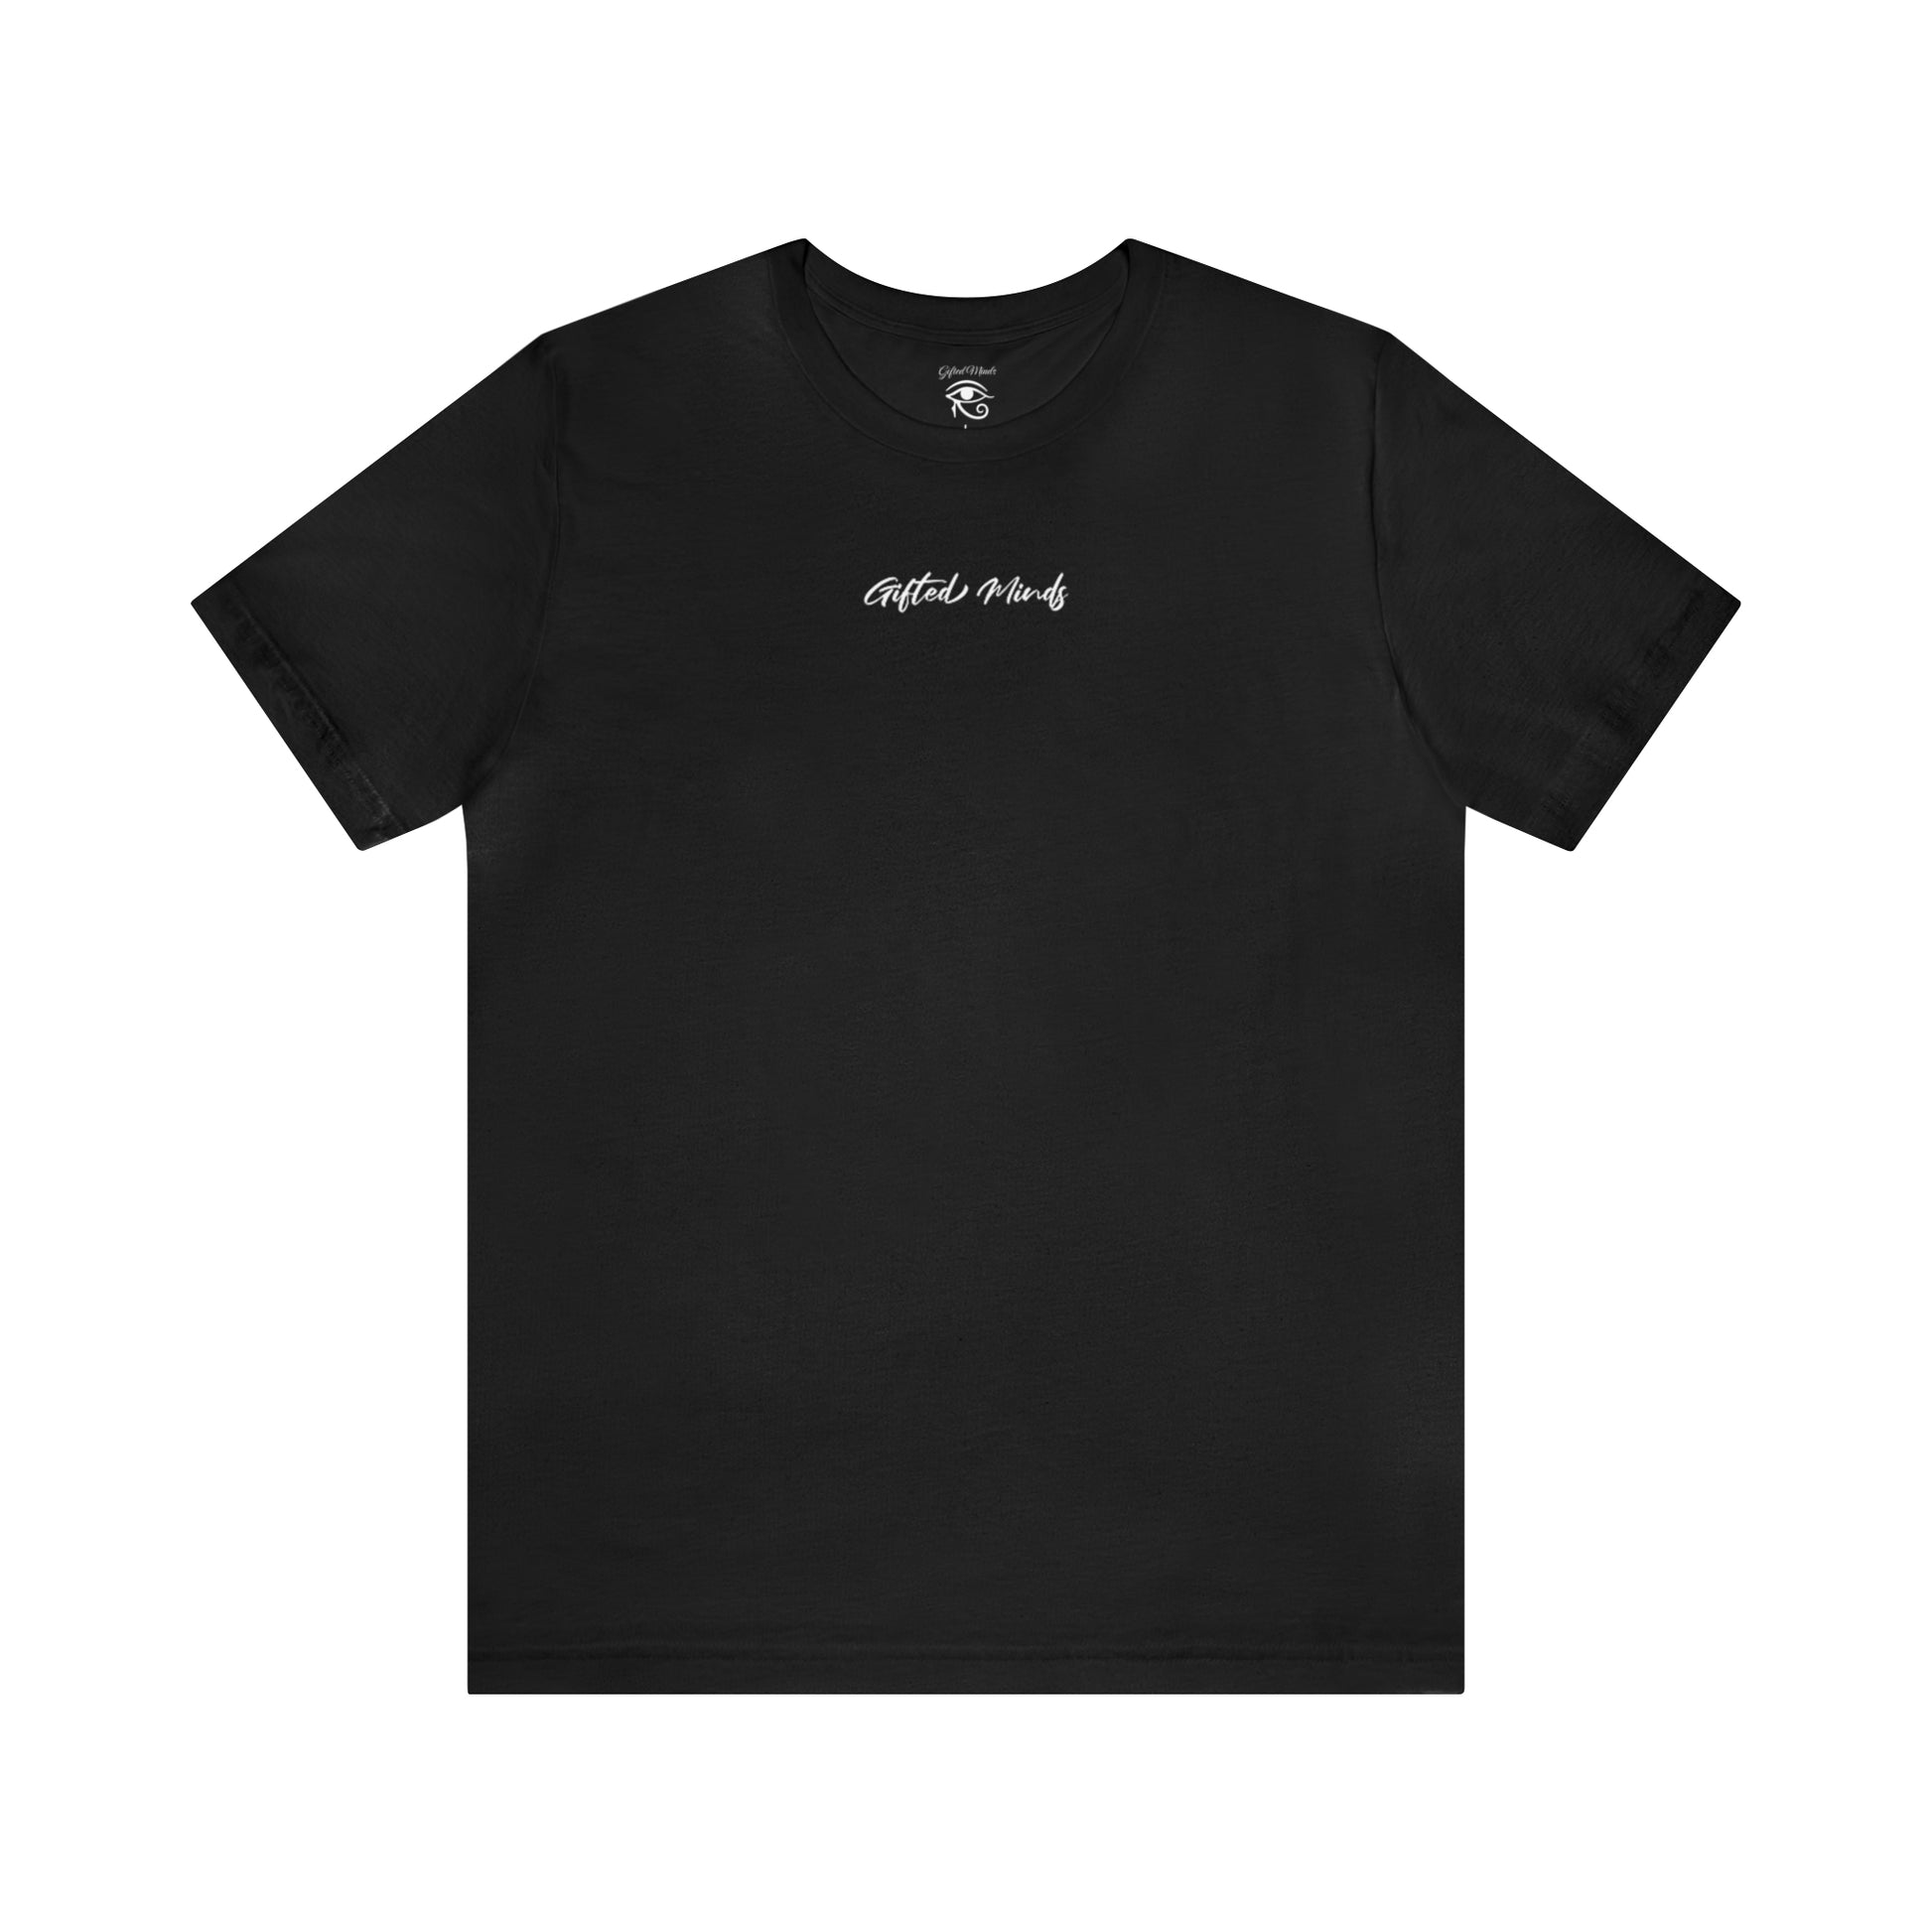 Gifted Minds Short Sleeve Tee - GFTD MNDS